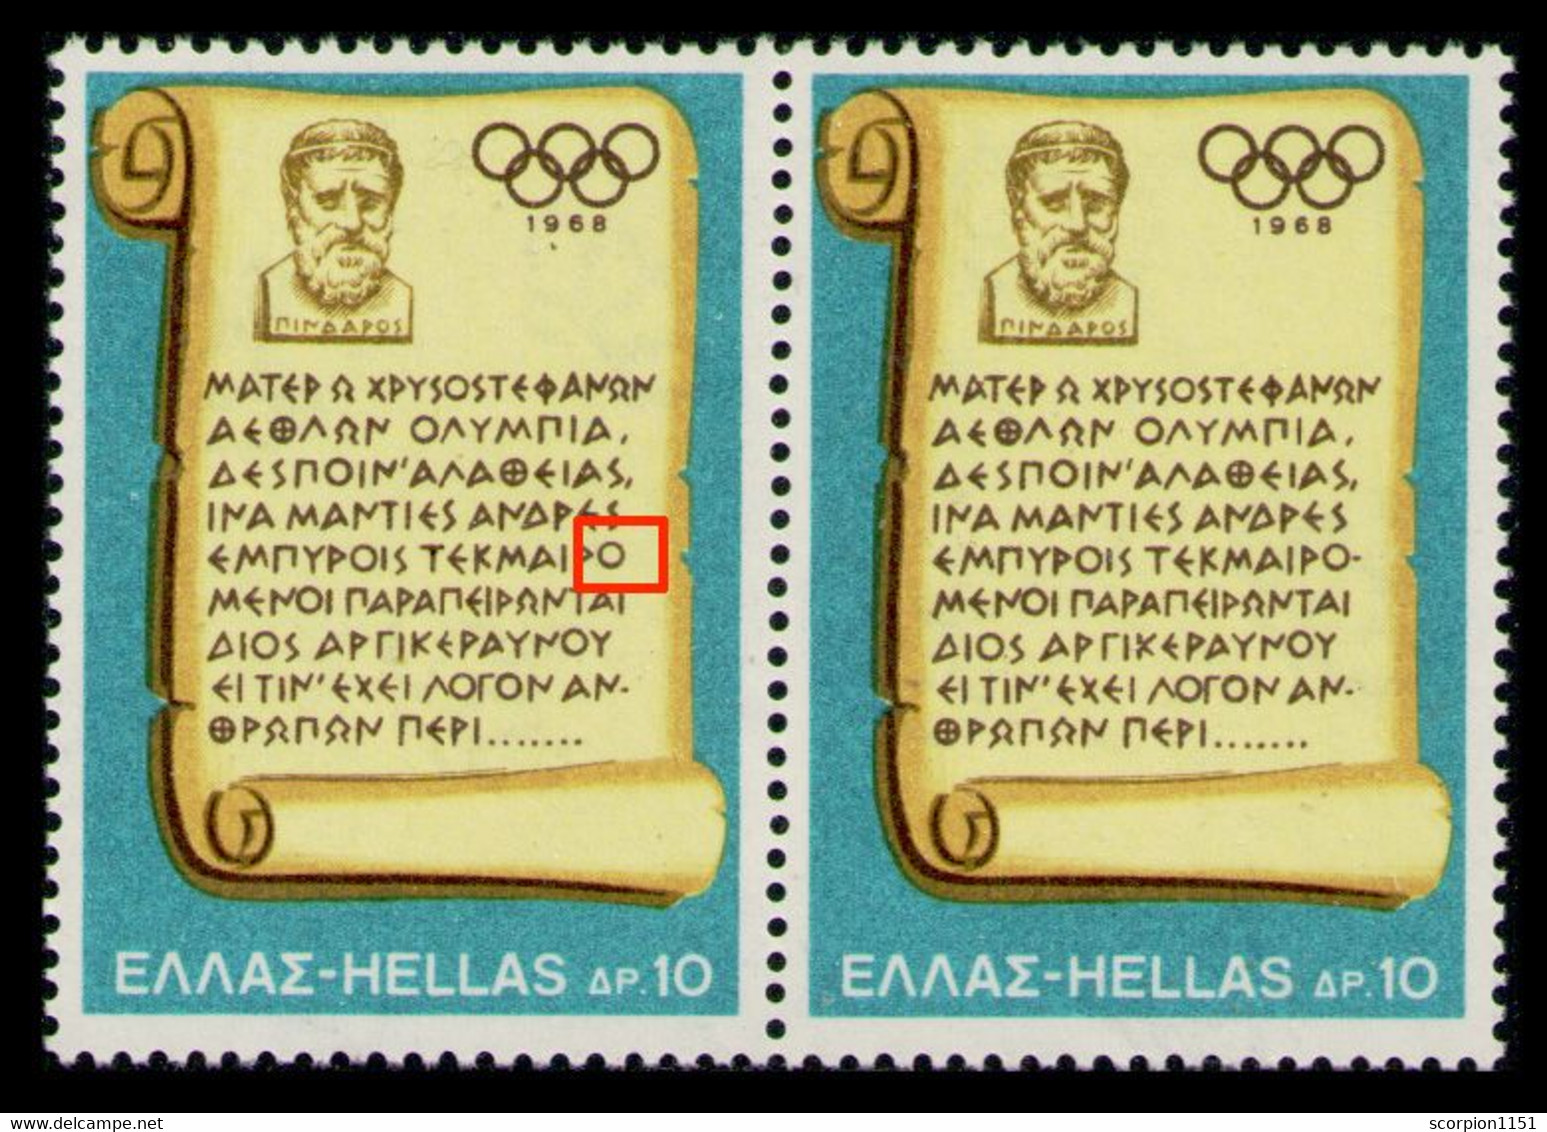 GREECE 1968 - ERROR No Dash After "O" At The Left Stamp RR In Pair - MNH** - Unused Stamps